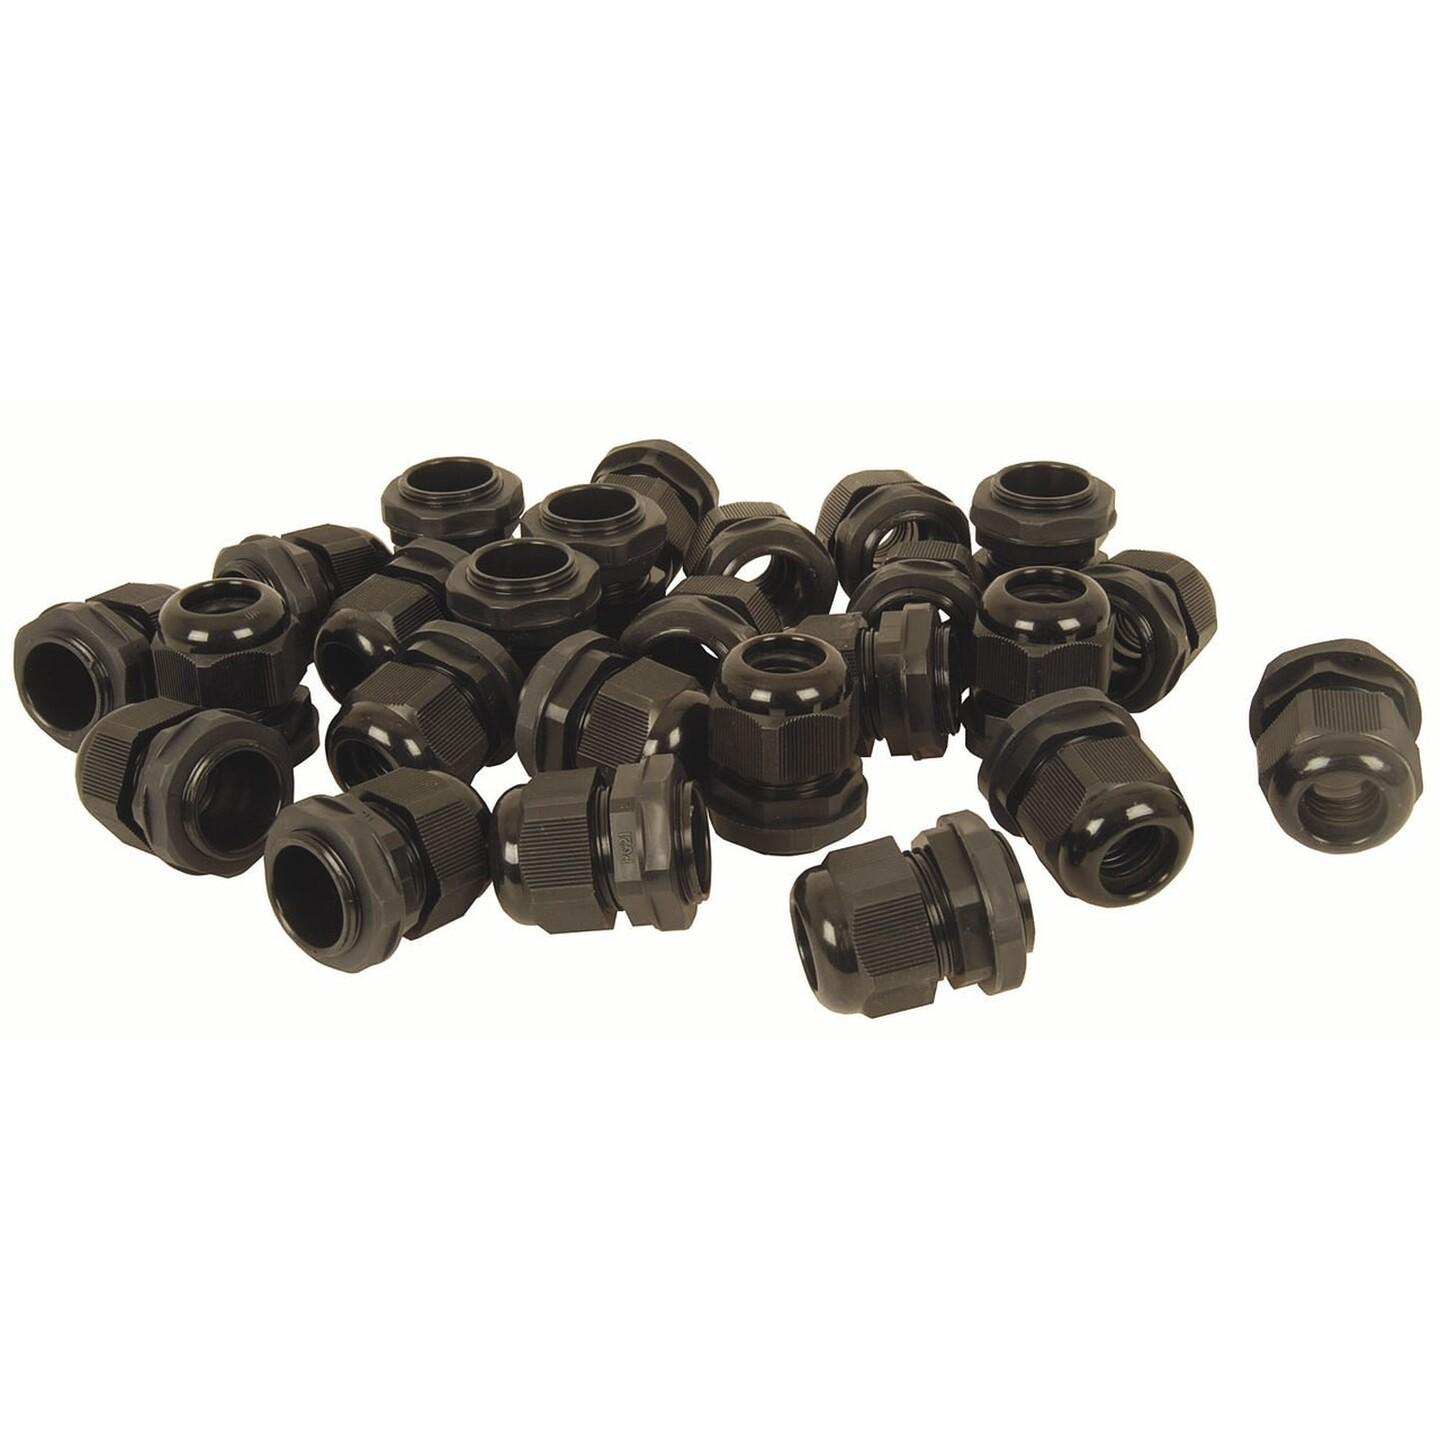 CABLE GLAND 13-18MM BLK PK25